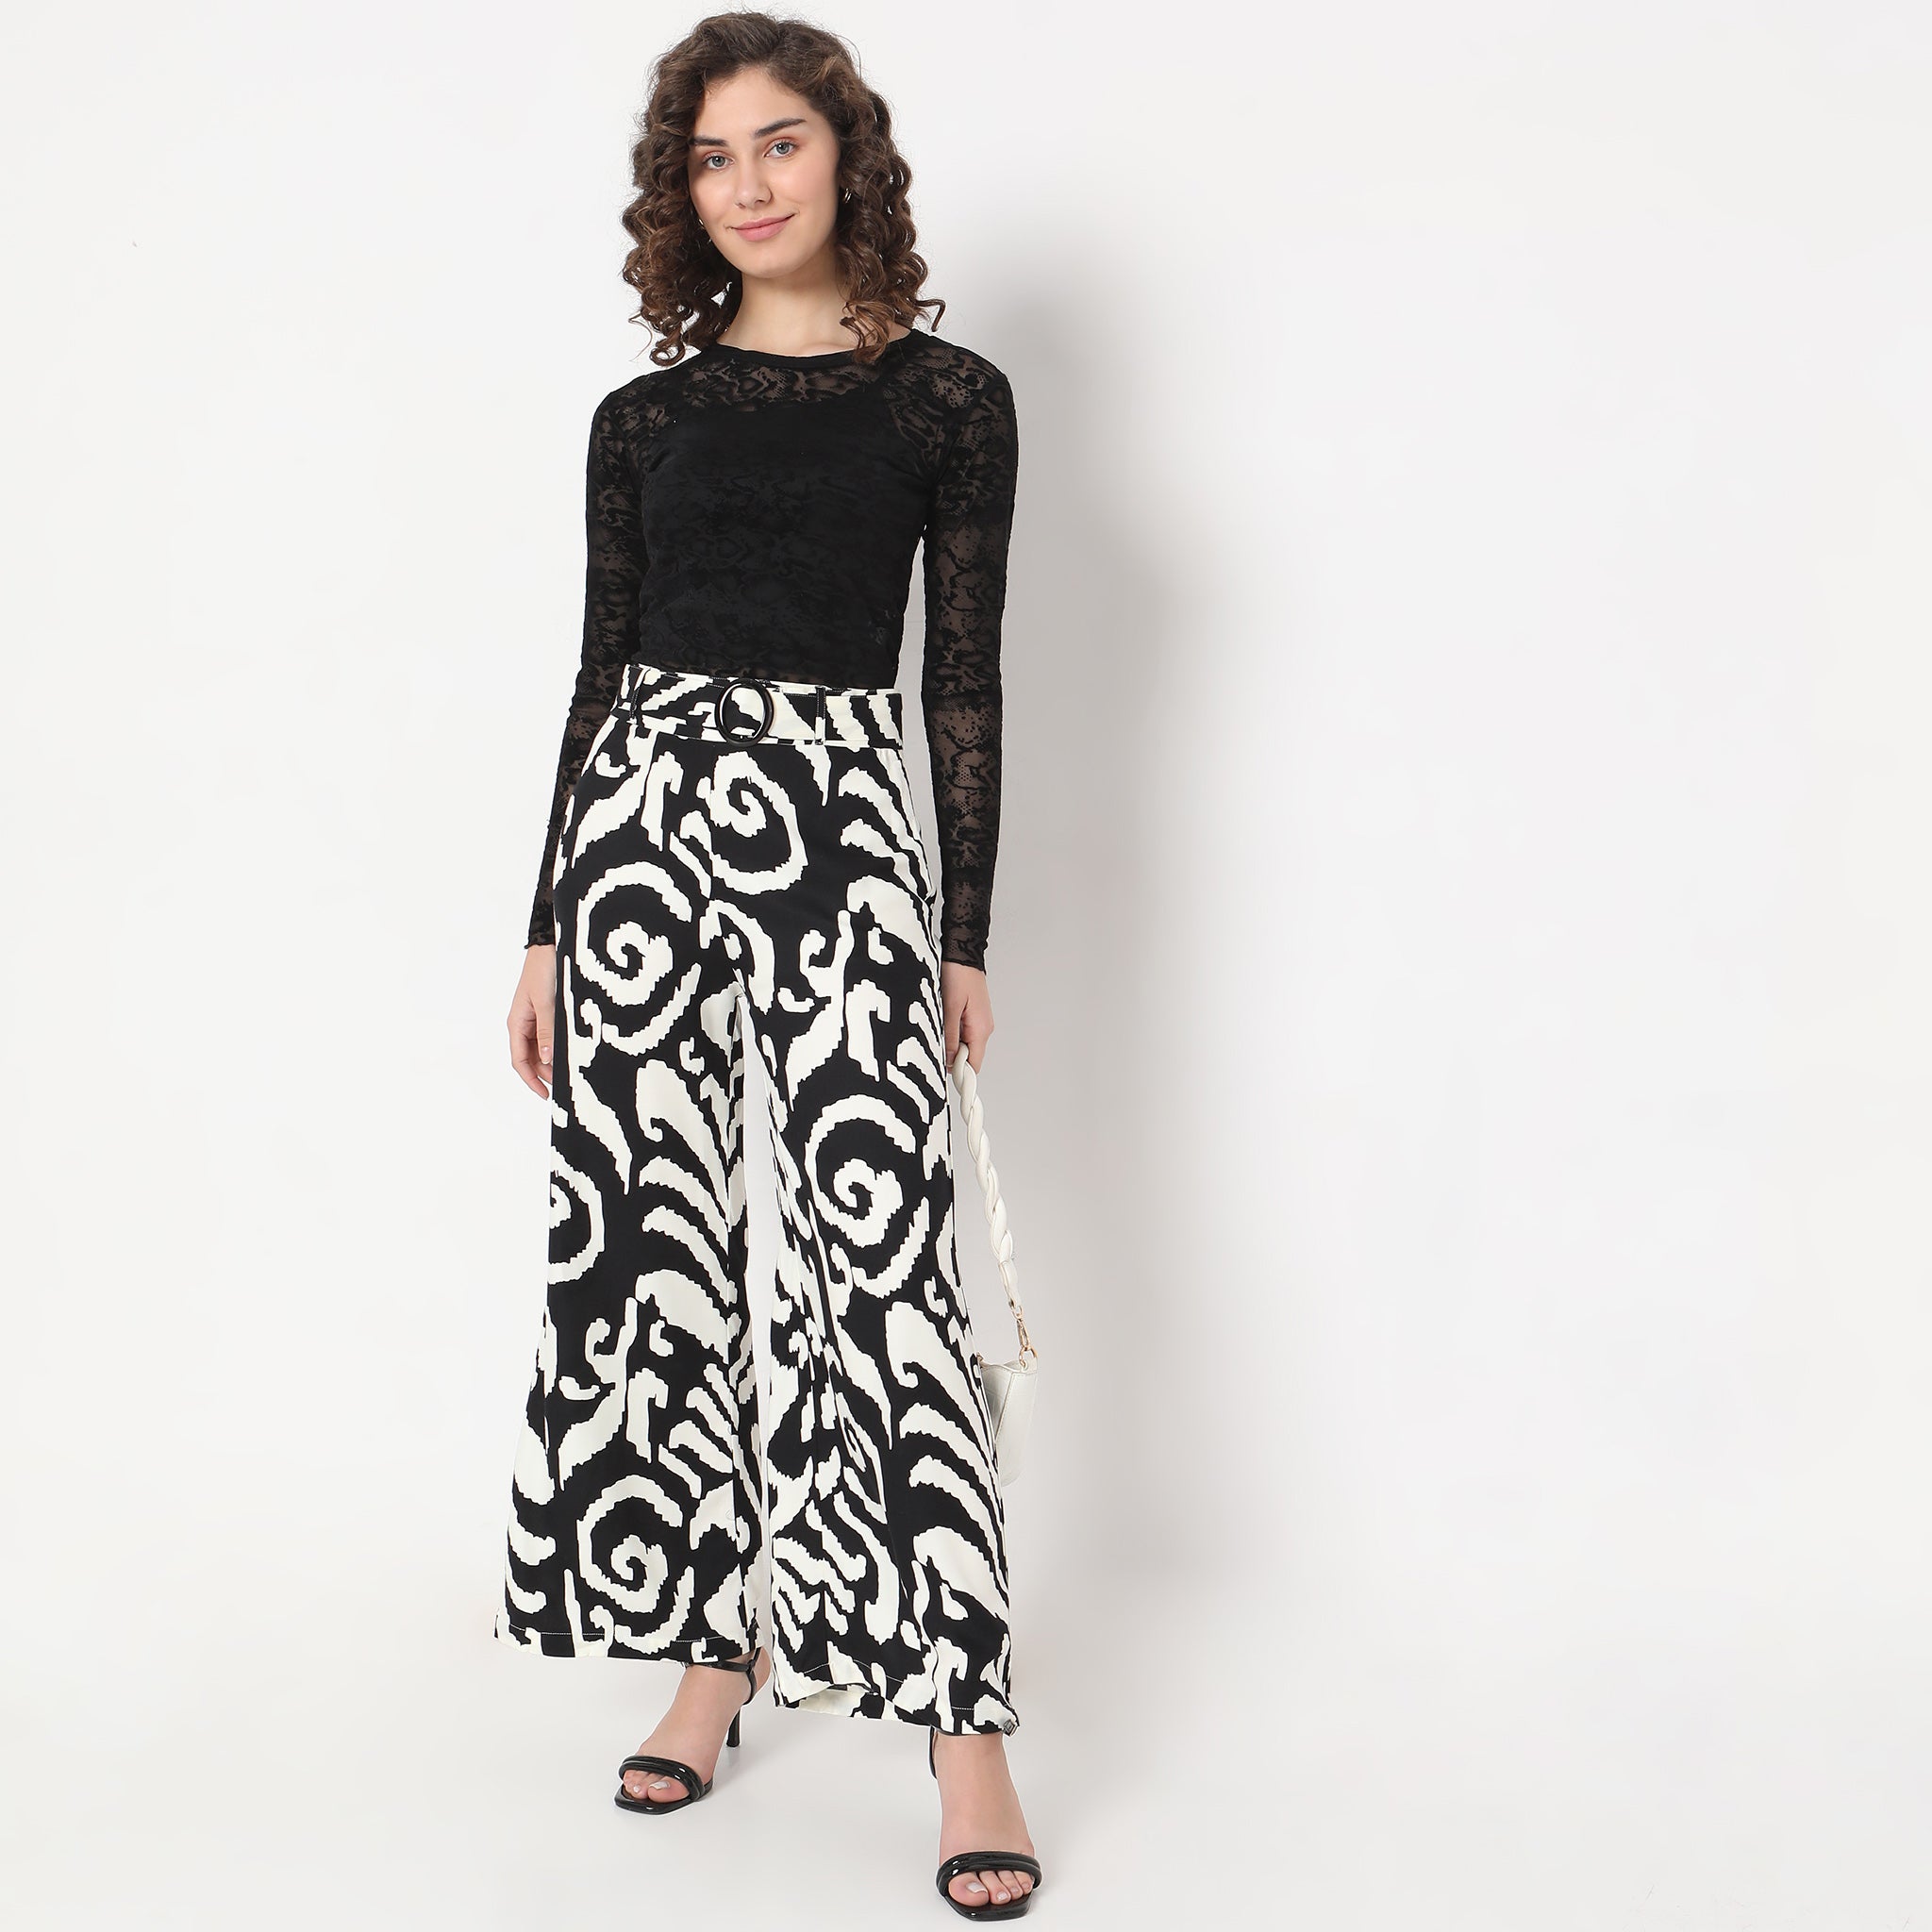 Flare Fit Abstract High Rise Palazzos